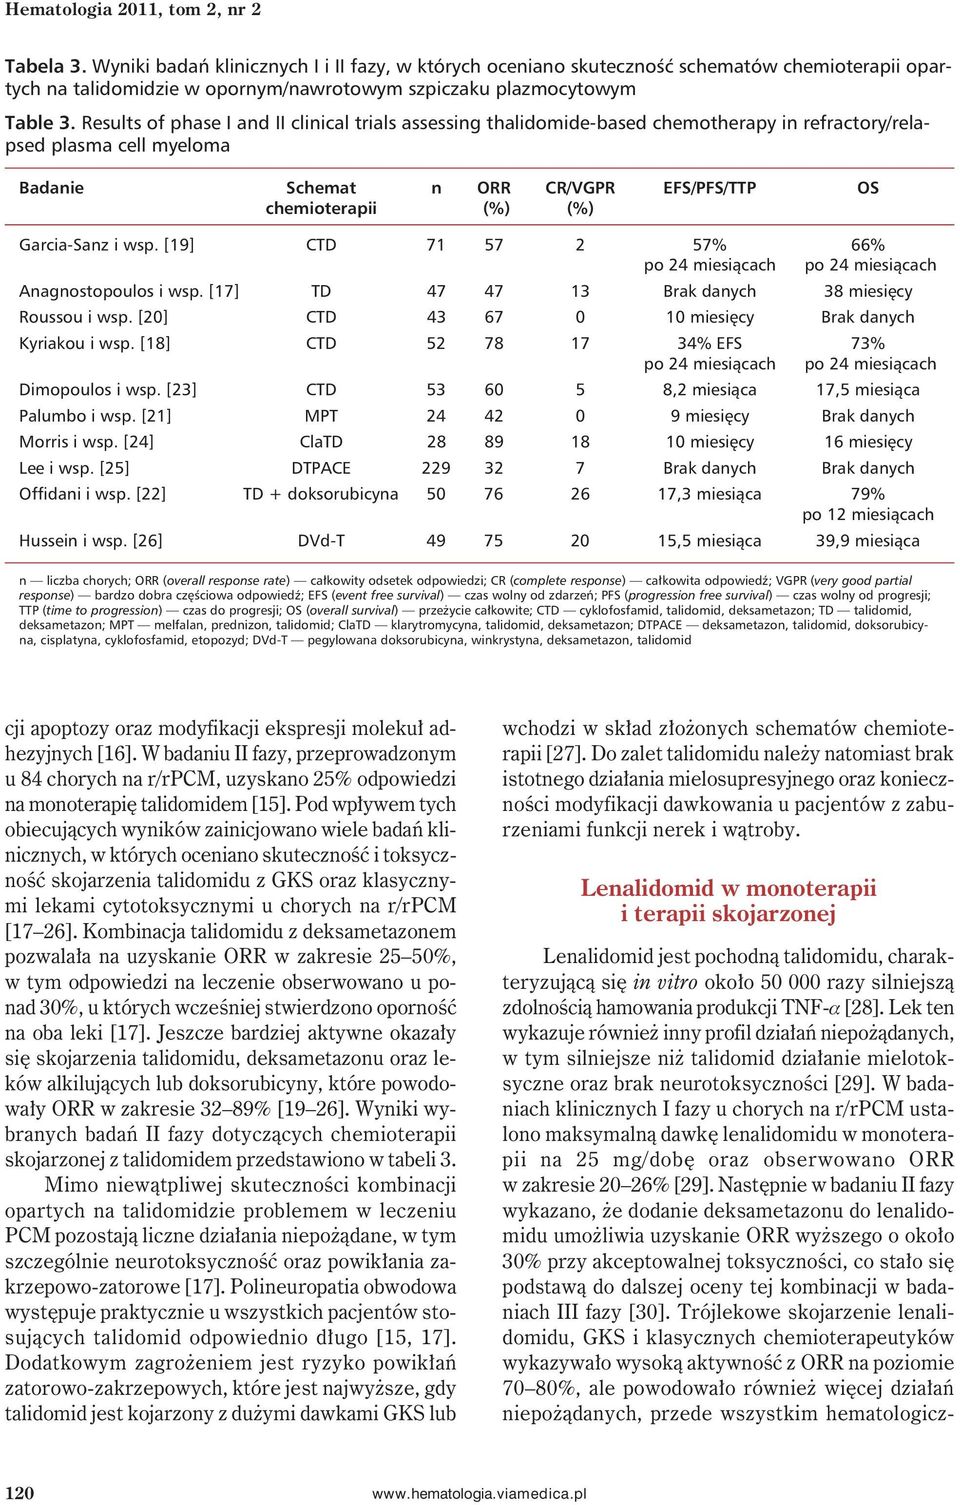 Results of phase I and II clinical trials assessing thalidomide-based chemotherapy in refractory/relapsed plasma cell myeloma Badanie Schemat n ORR CR/VGPR EFS/PFS/TTP OS chemioterapii (%) (%)